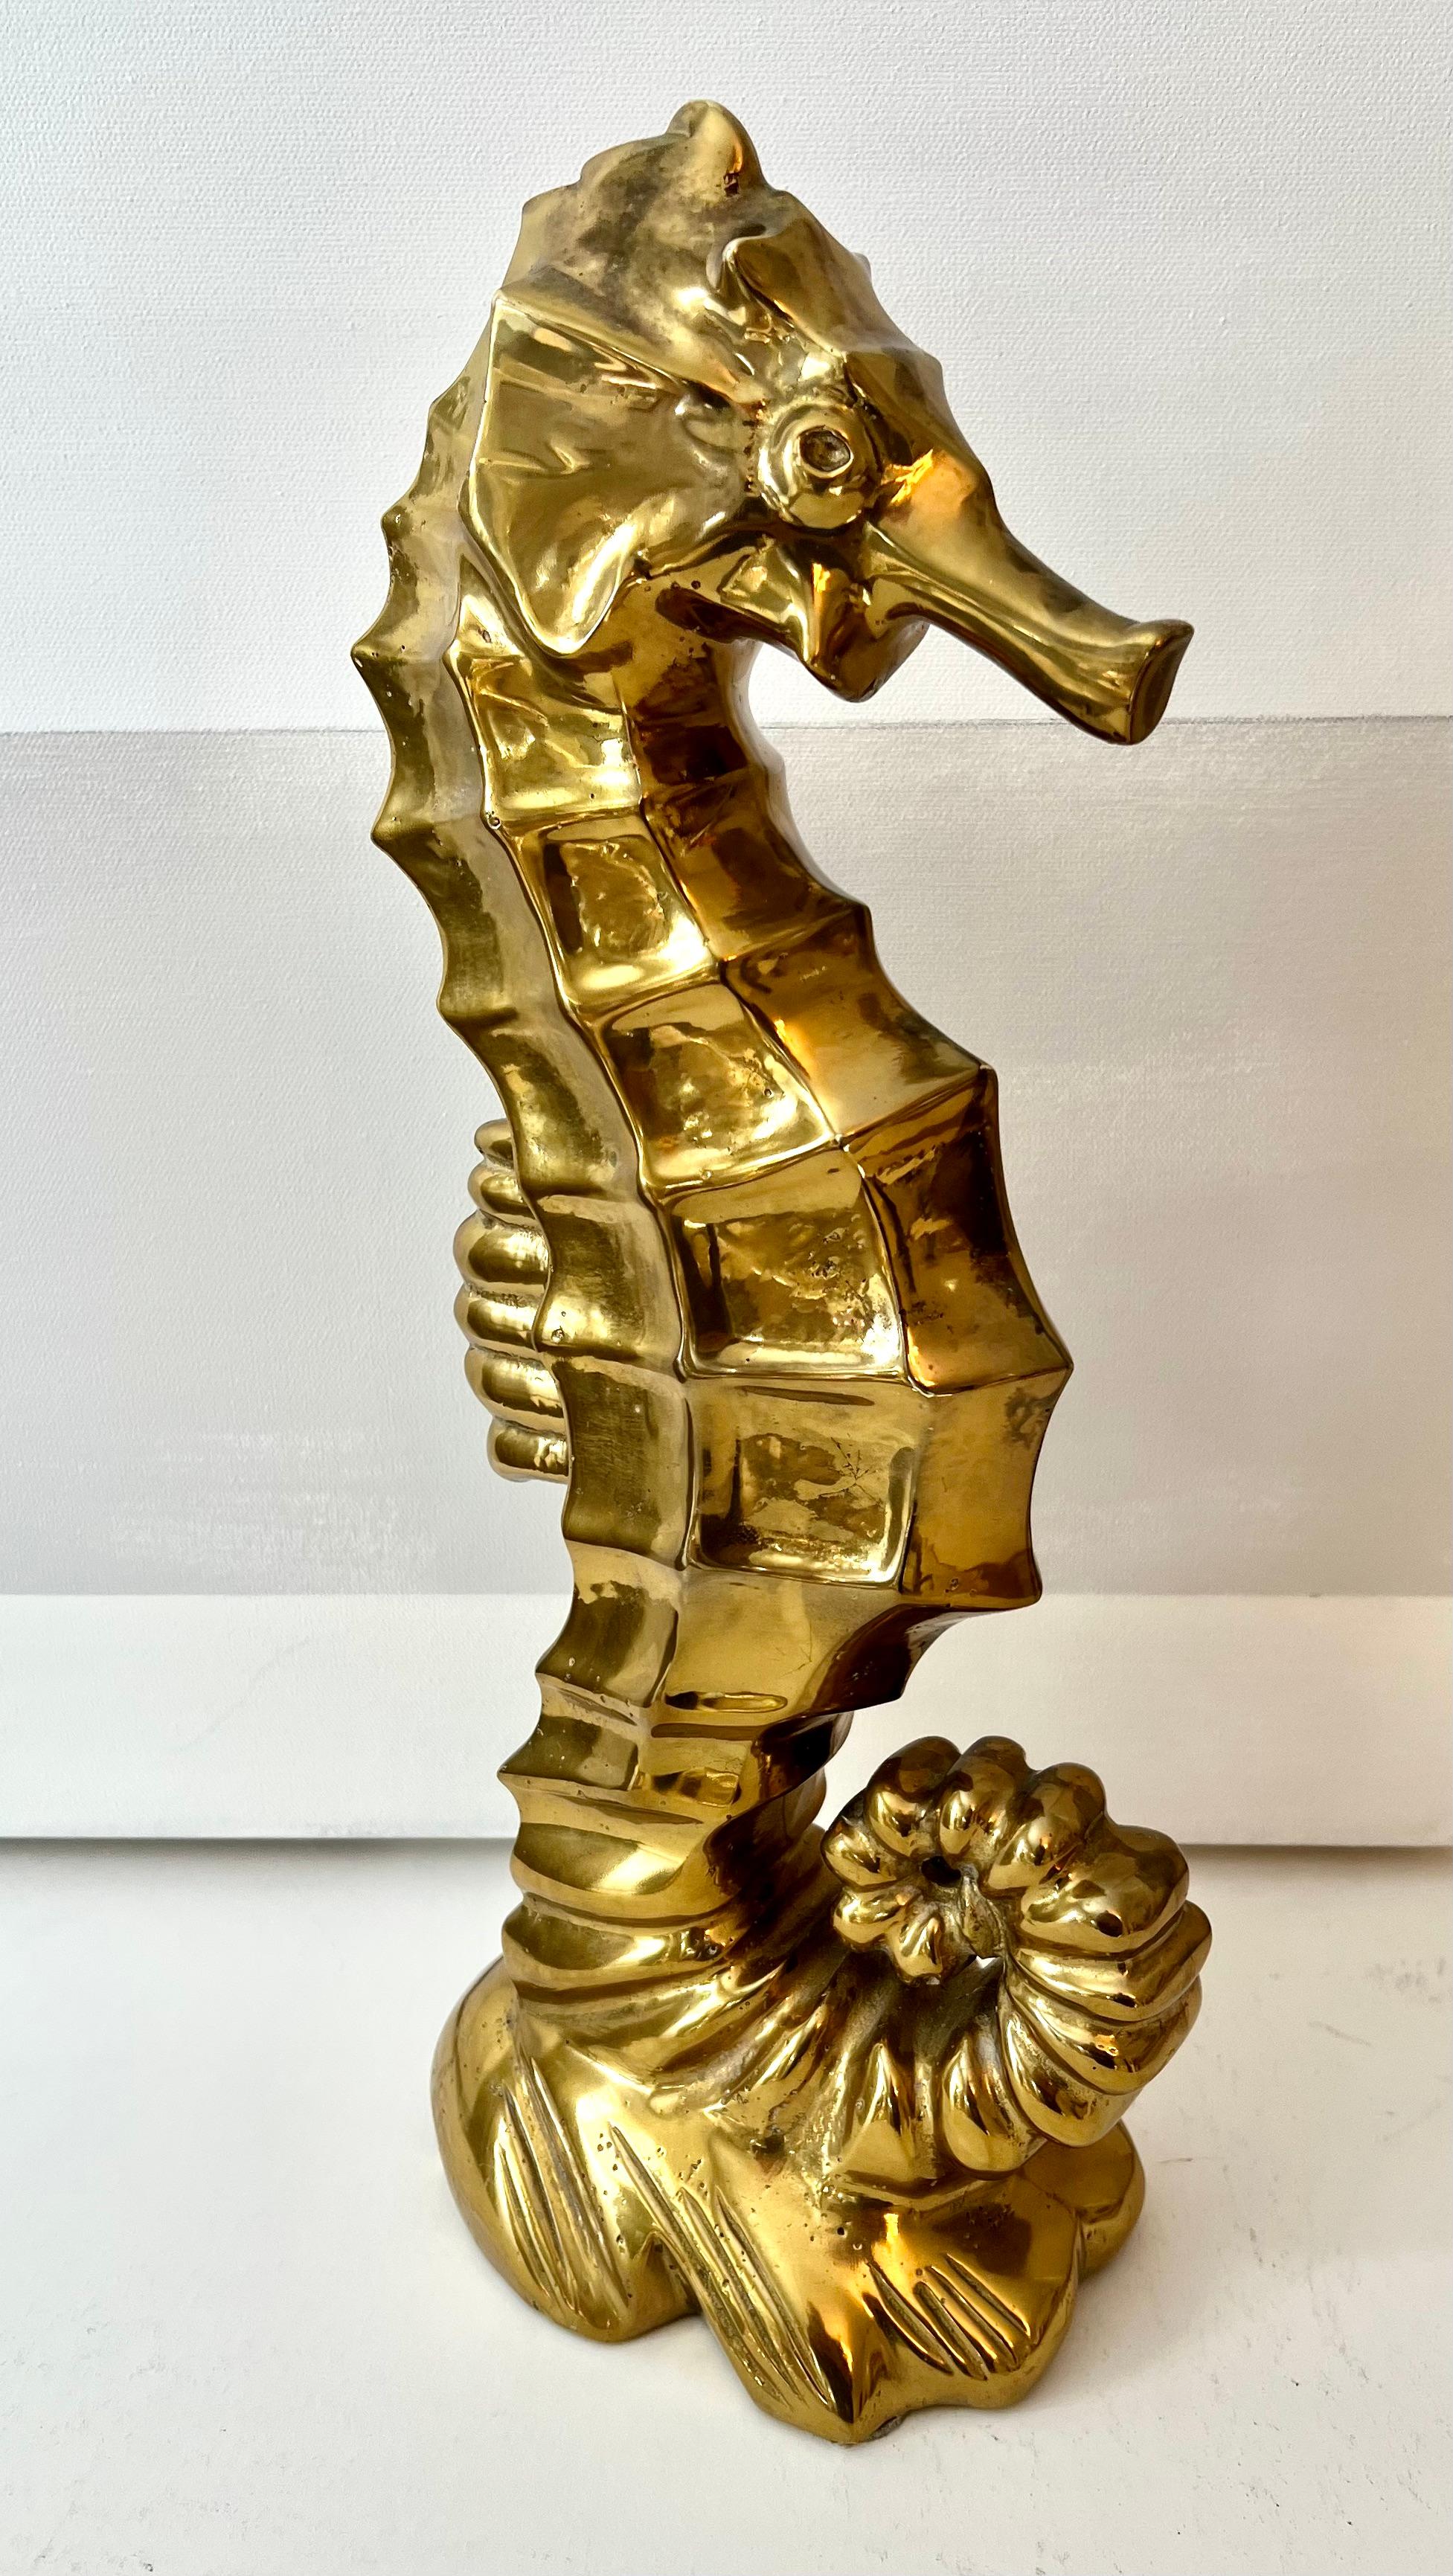  Decorative Sculpture of a seahorse - Gold over bronze.  A stunning piece for the centerpiece of a table or room, or an addition to a seaside story in the garden or living space.  The piece, at 18.5 pounds, the sculpture is a substantial